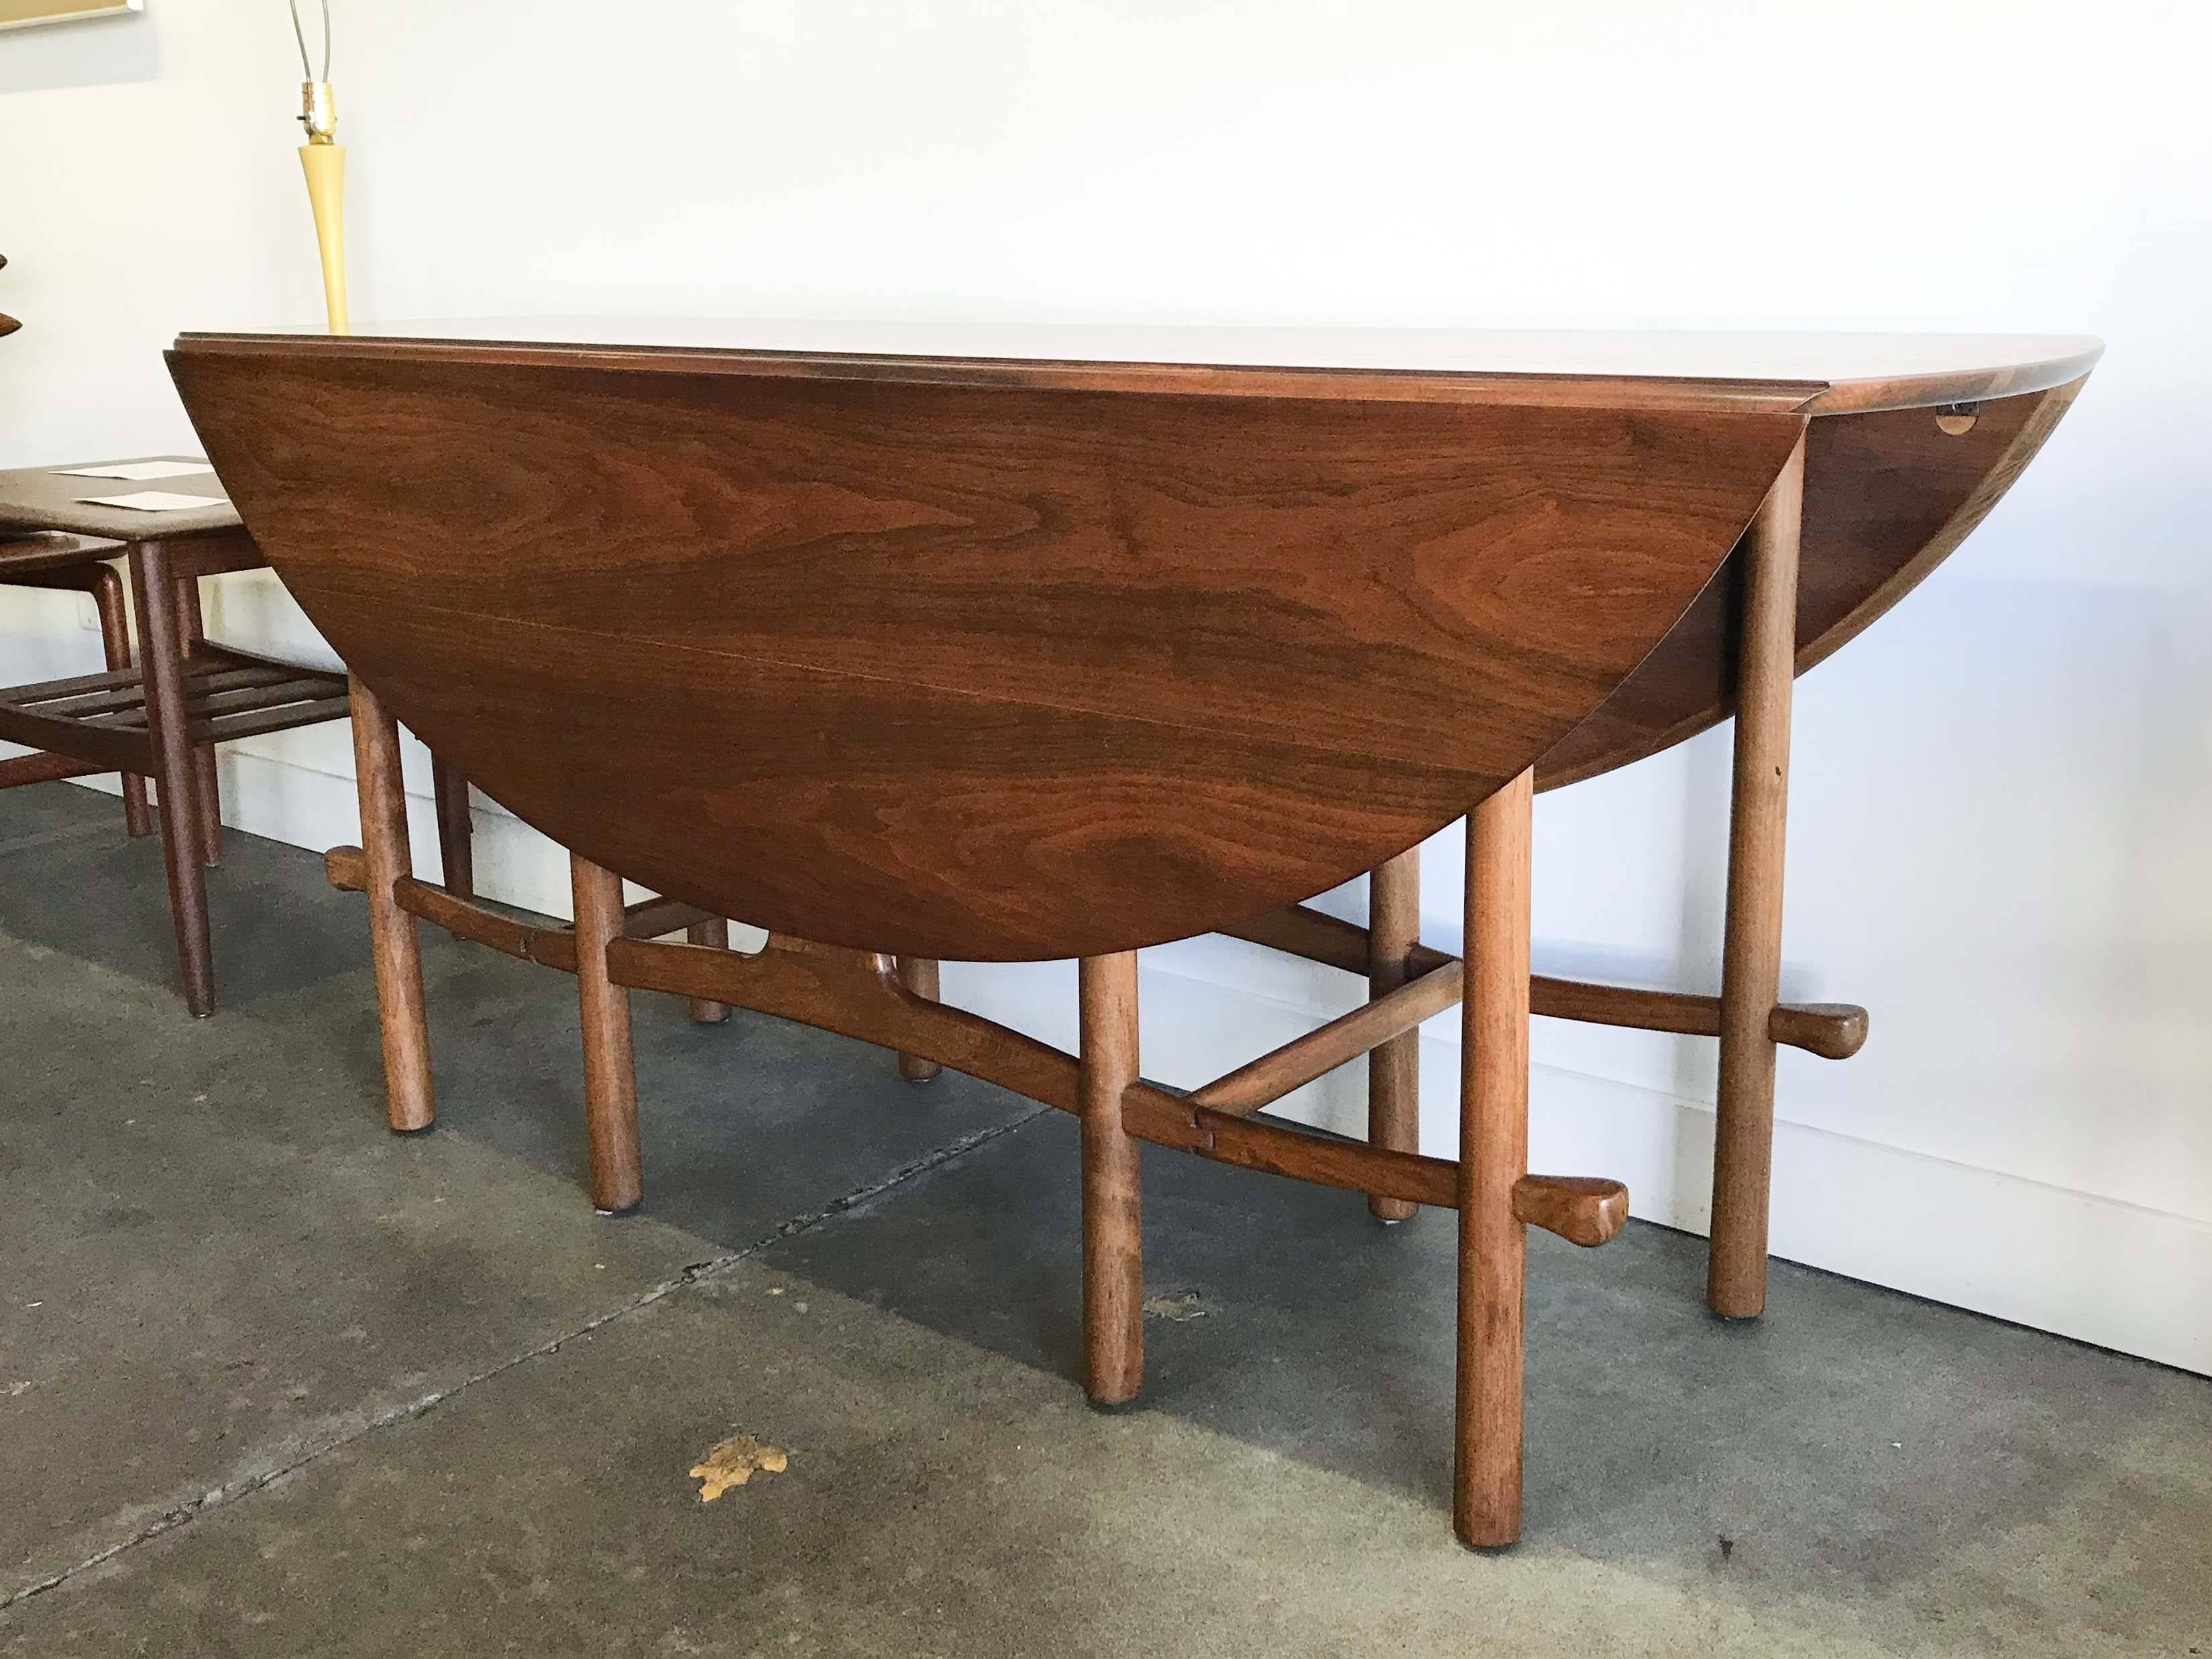 Heritage-Henredon was a collaboration between Drexel Heritage and Henredon Furniture Manufacturers. Approximately 75 designs were made, 40 by Henredon and 35 by Heritage. 

This walnut gate leg table has only had two owners in it's lifetime. It is